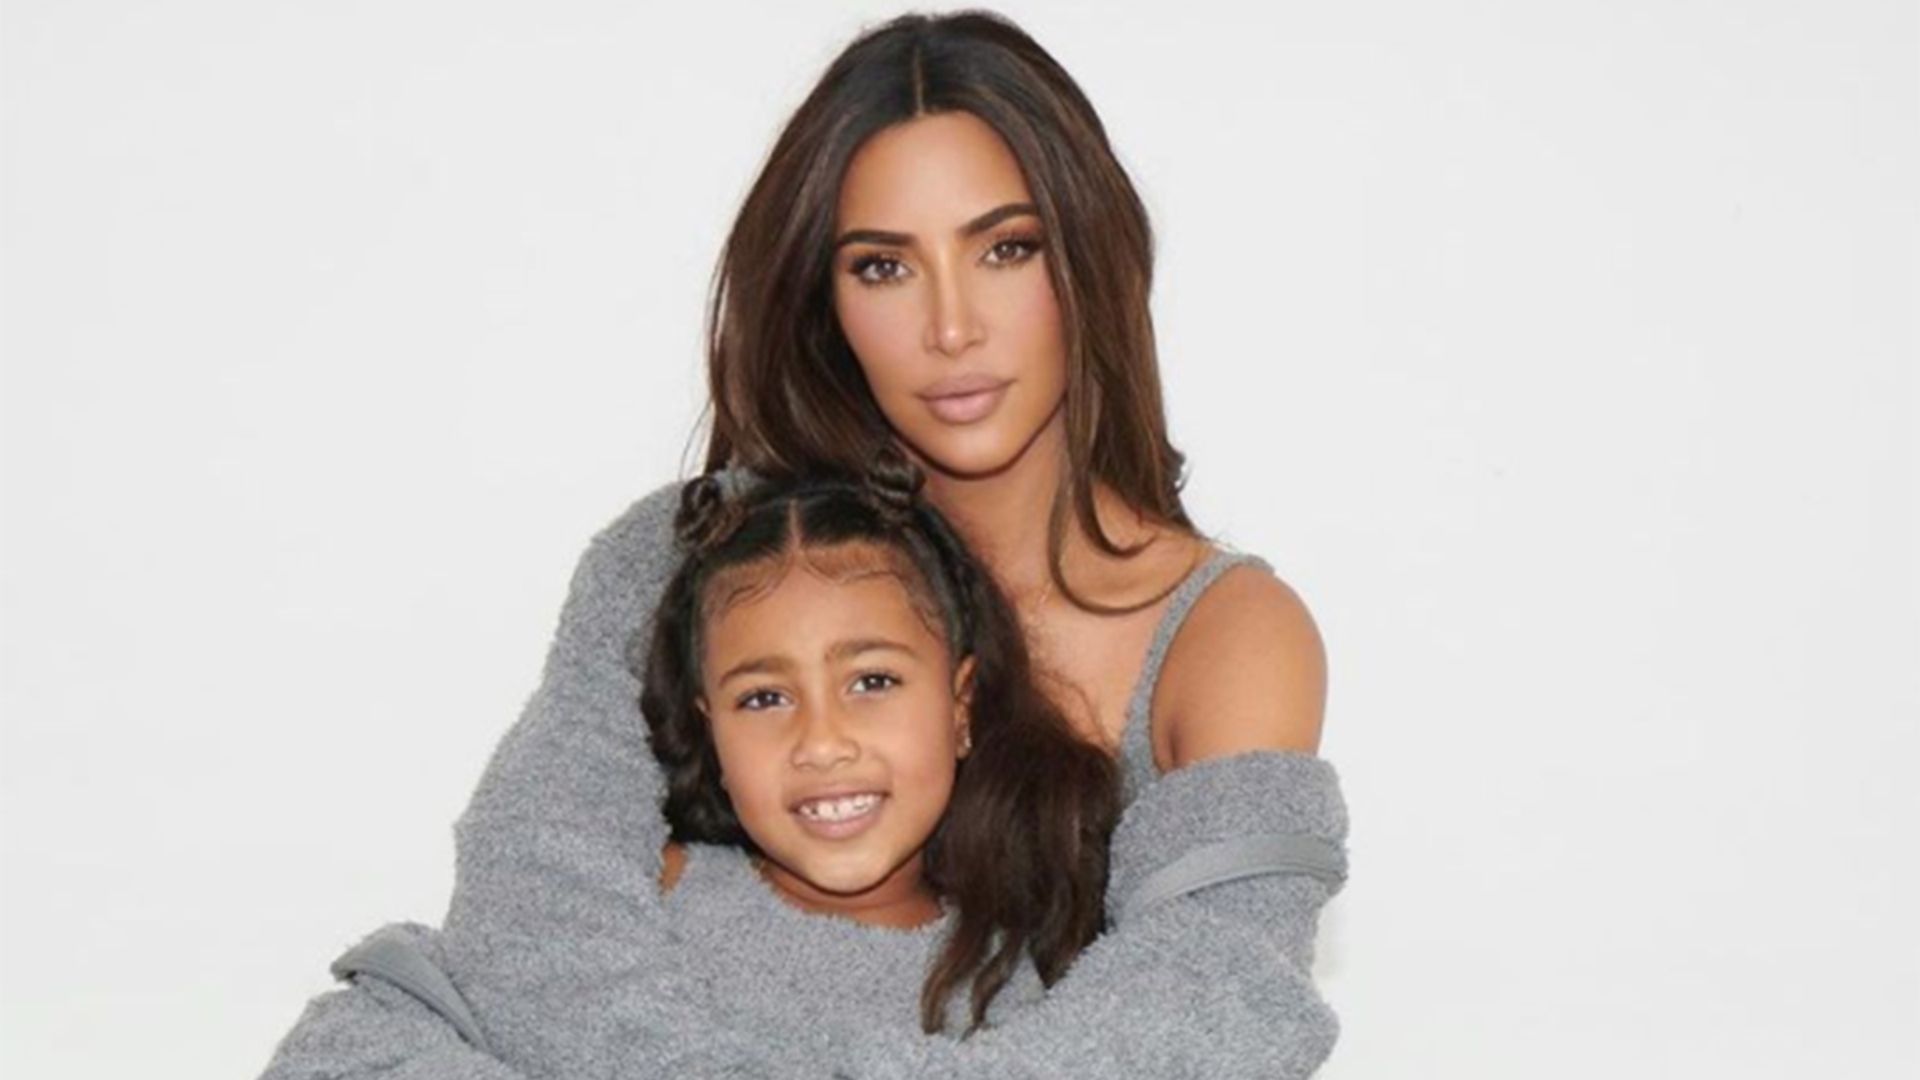 Kim Kardashian furiously hits back after questions about North West's painting